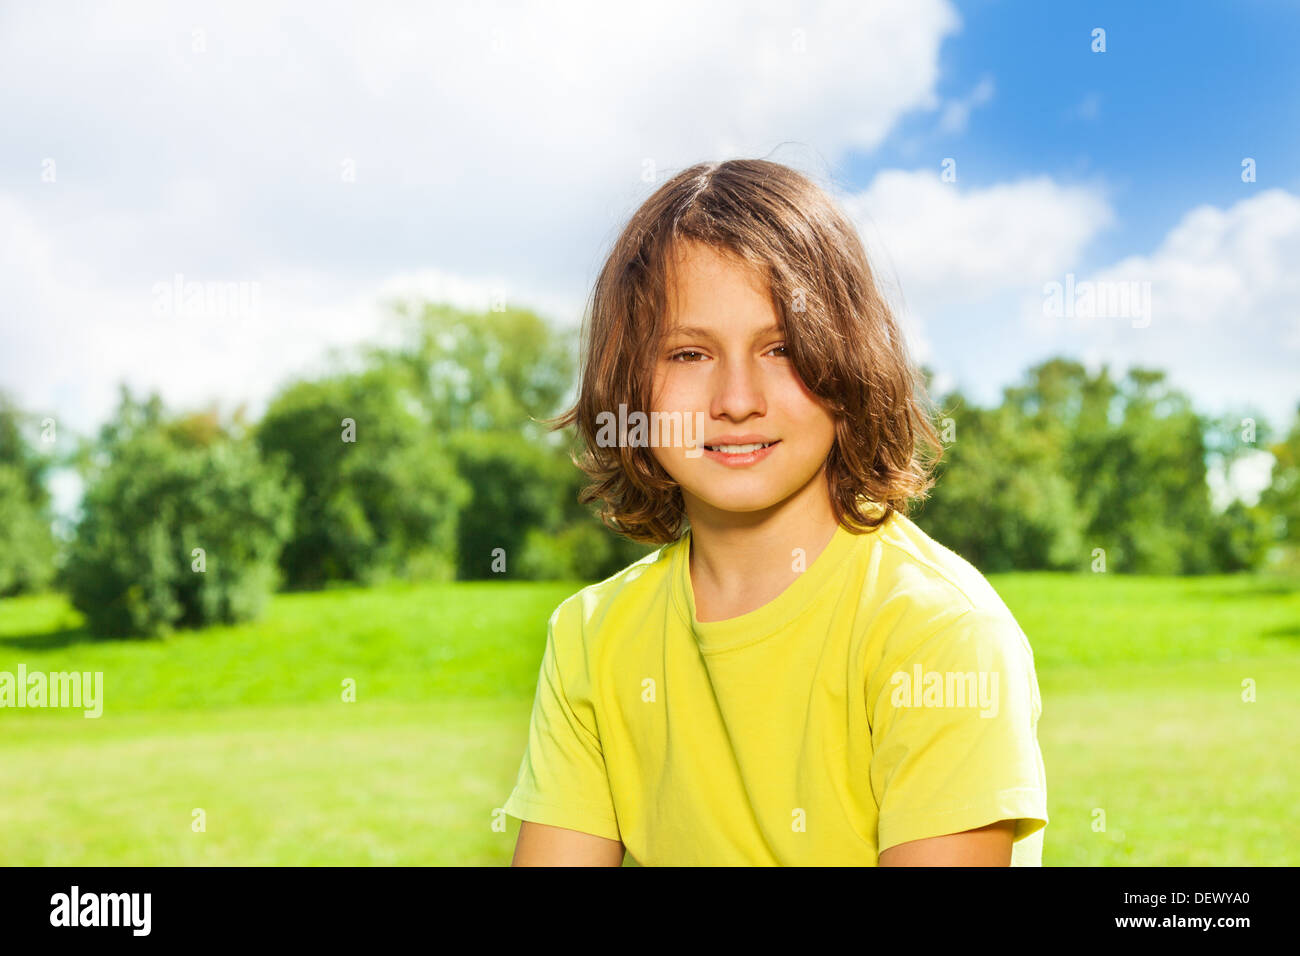 Nice handsome 12 years old boy portrait in the park outside on sunny day Stock Photo